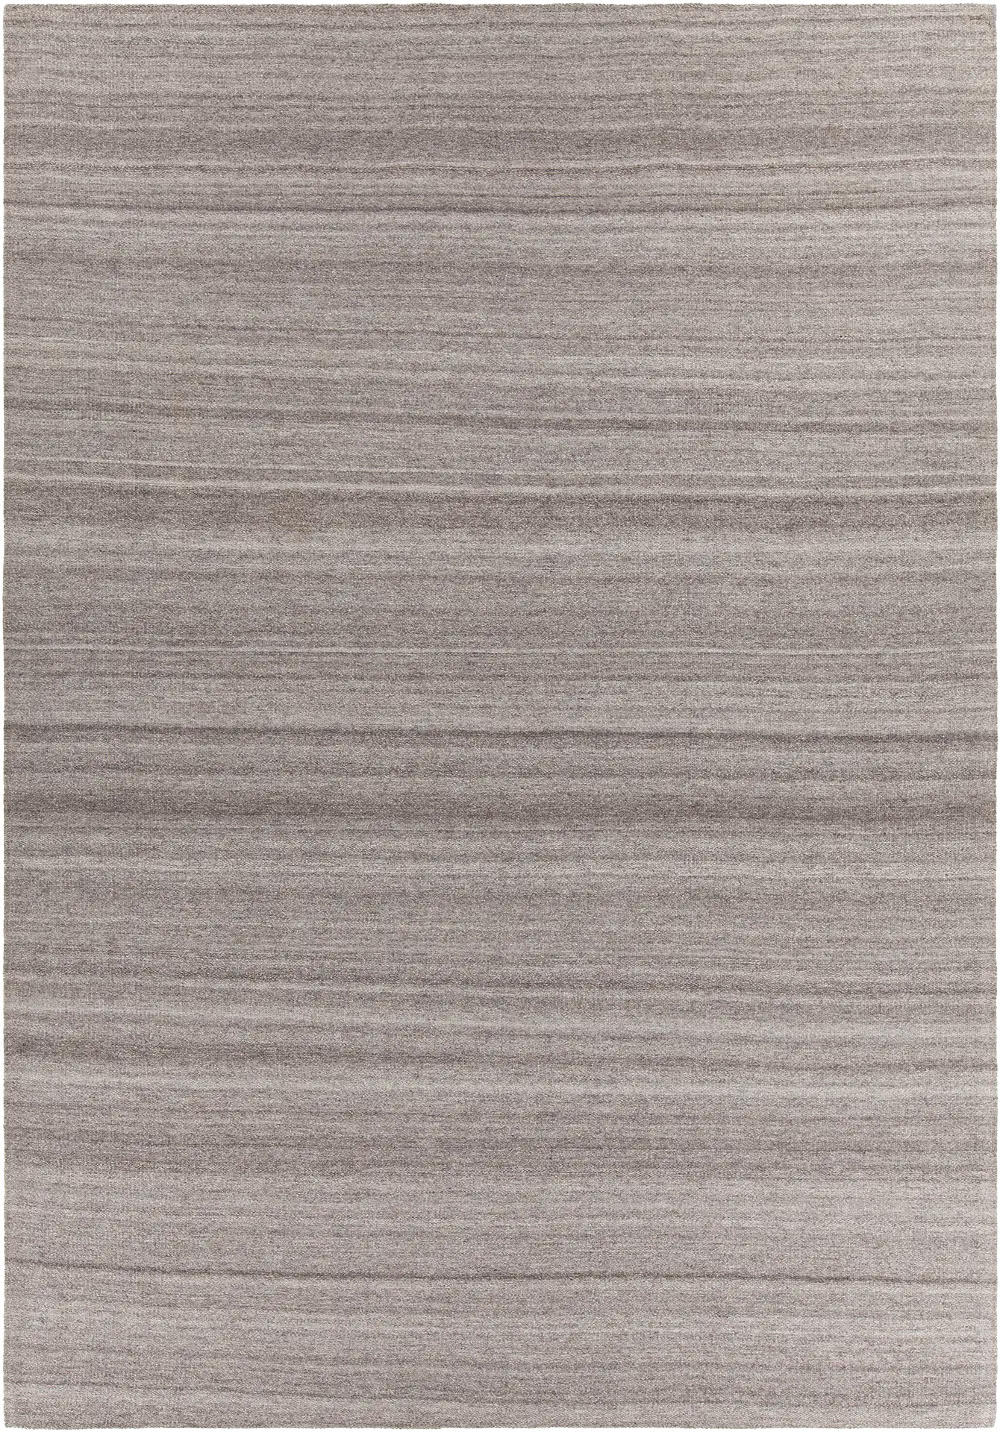 8 x 11 Large Contemporary Gray Area Rug - Hedonia-1